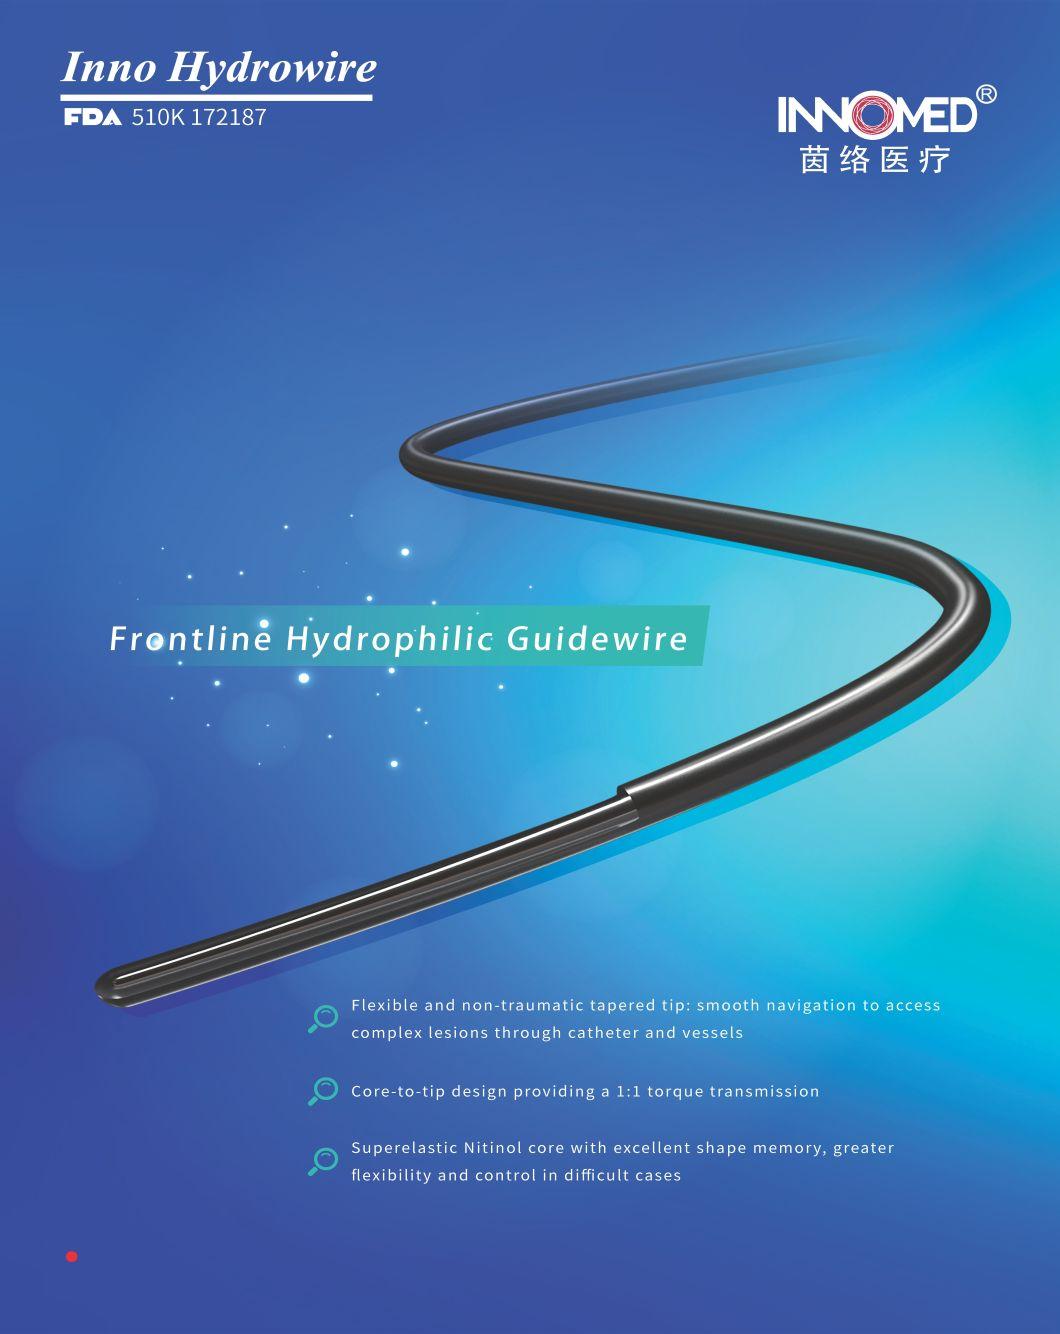 Manufacturer of Nitinol Contrast Guide Wires for Interventional Therapy